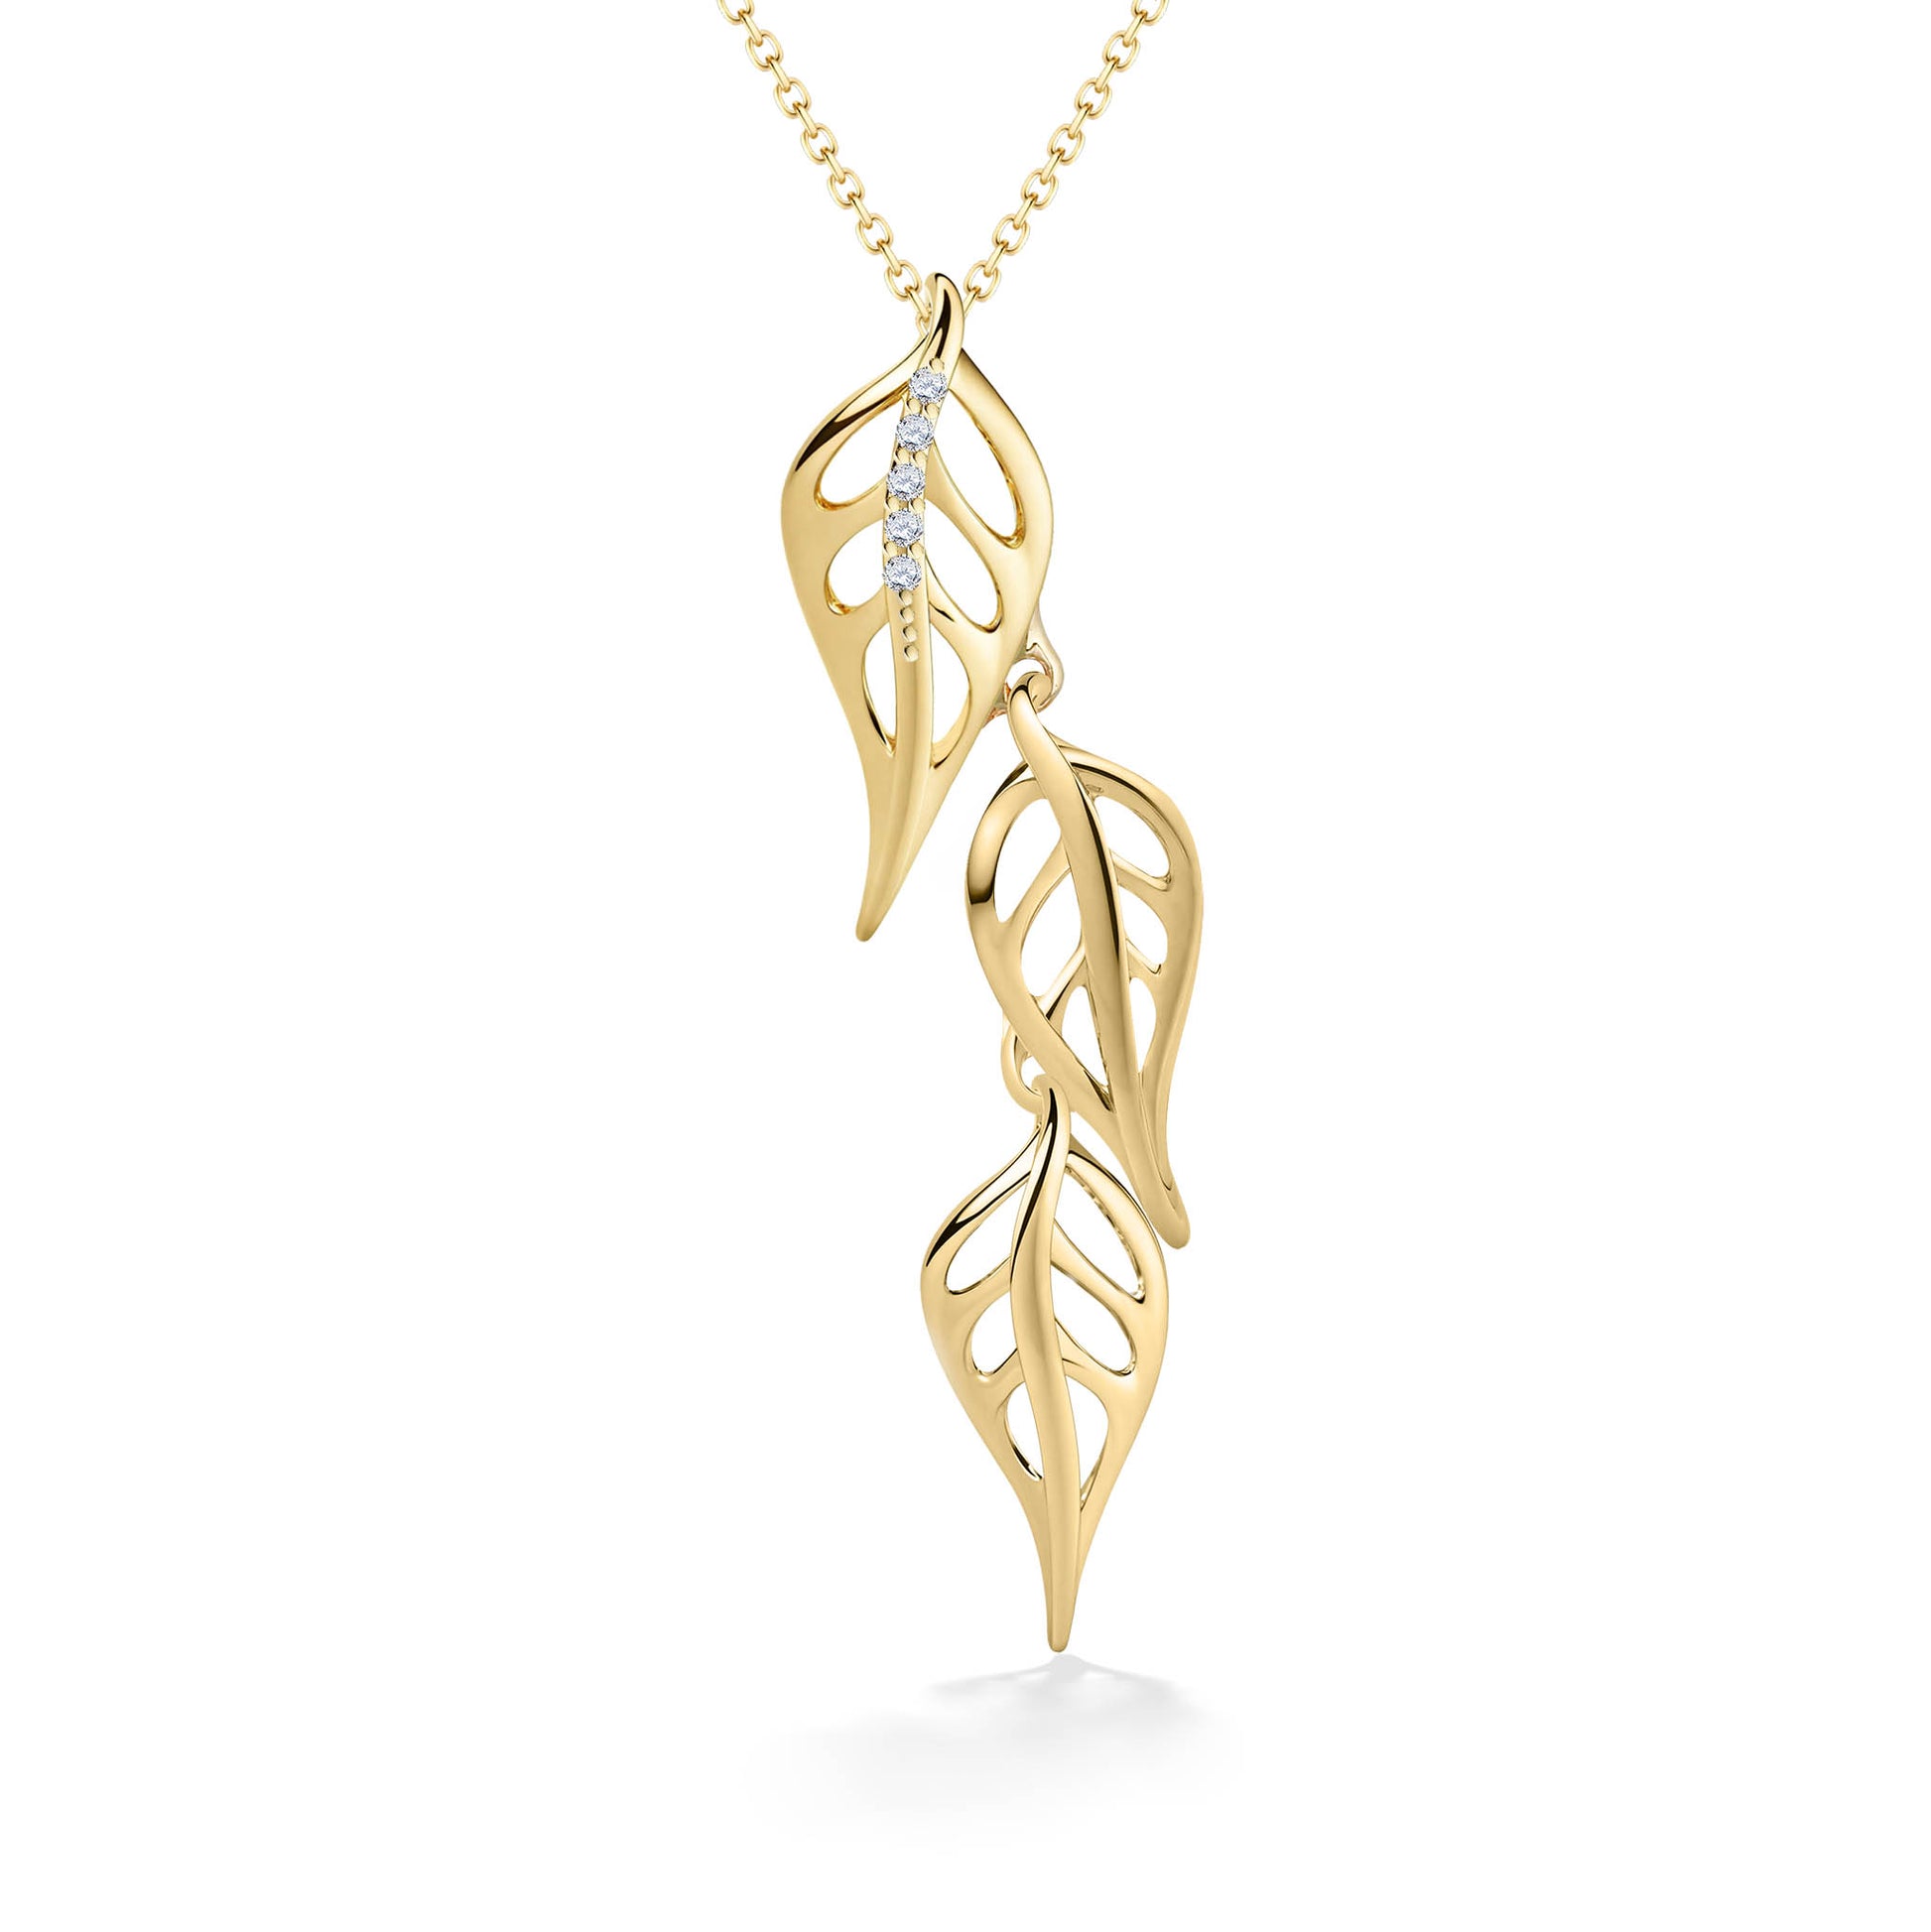 44673 - 14K Yellow Gold - Maile Leaf Drop Pendant